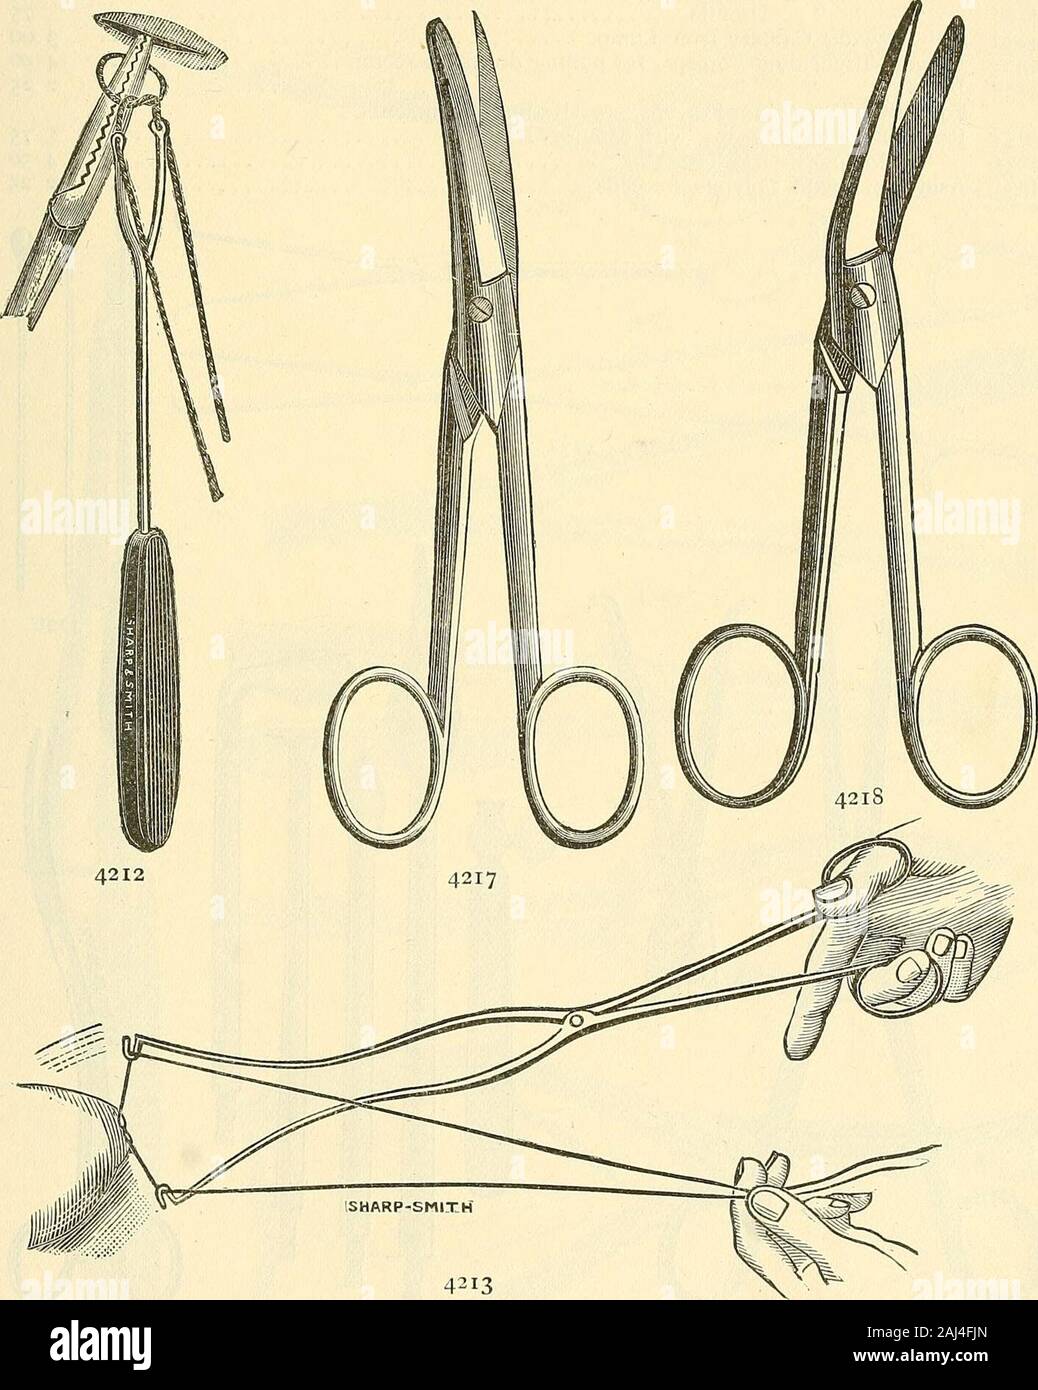 Catalogue of Sharp & Smith : importers, manufacturers, wholesale and retail dealers in surgical instruments, deformity apparatus, artificial limbs, artificial eyes, elastic stockings, trusses, crutches, supporters, galvanic and faradic batteries, etc., surgeons' appliances of every description . 4208Instruments designated by a * are illustrated. SHARP & SMITH, CHICAGO. QSl RECTAL INSTRUMENTS. FIG. *42i2 Dr. Chas. D. Scudders Knot Tyer $ i 50 *42I3 Carrolls Knot Tyer. i 85 4214 Allingharas Scissors 3 75 421=; Saw Tooth 4 50 4216 Bushs Pile I 15 *42i7 Angular $1 00 to 2 50 *42i8 Curved on flat i Stock Photo